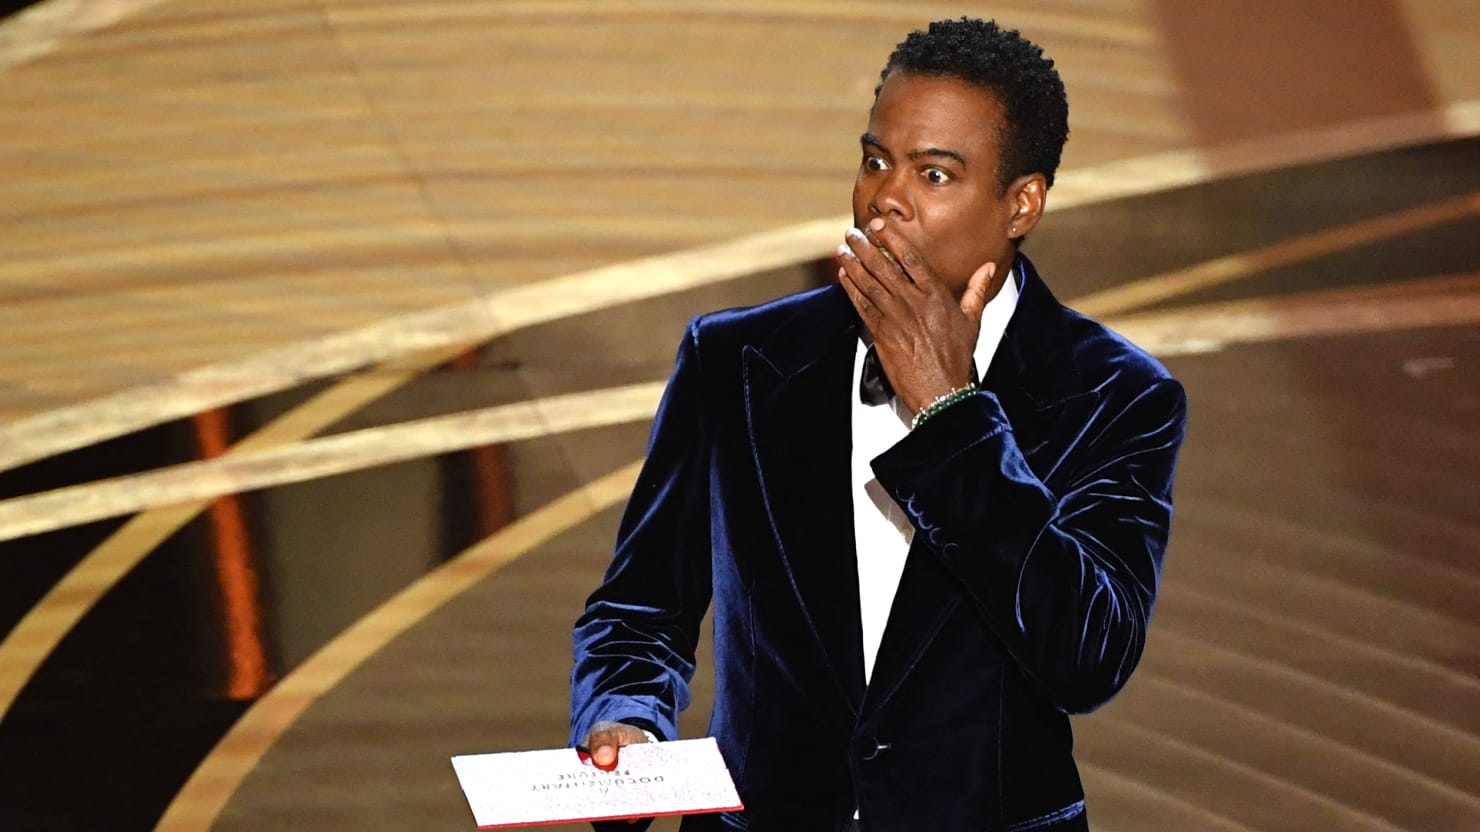 Chris Rock Tells Arizona Audience He Turned Down an Offer to Host 2023